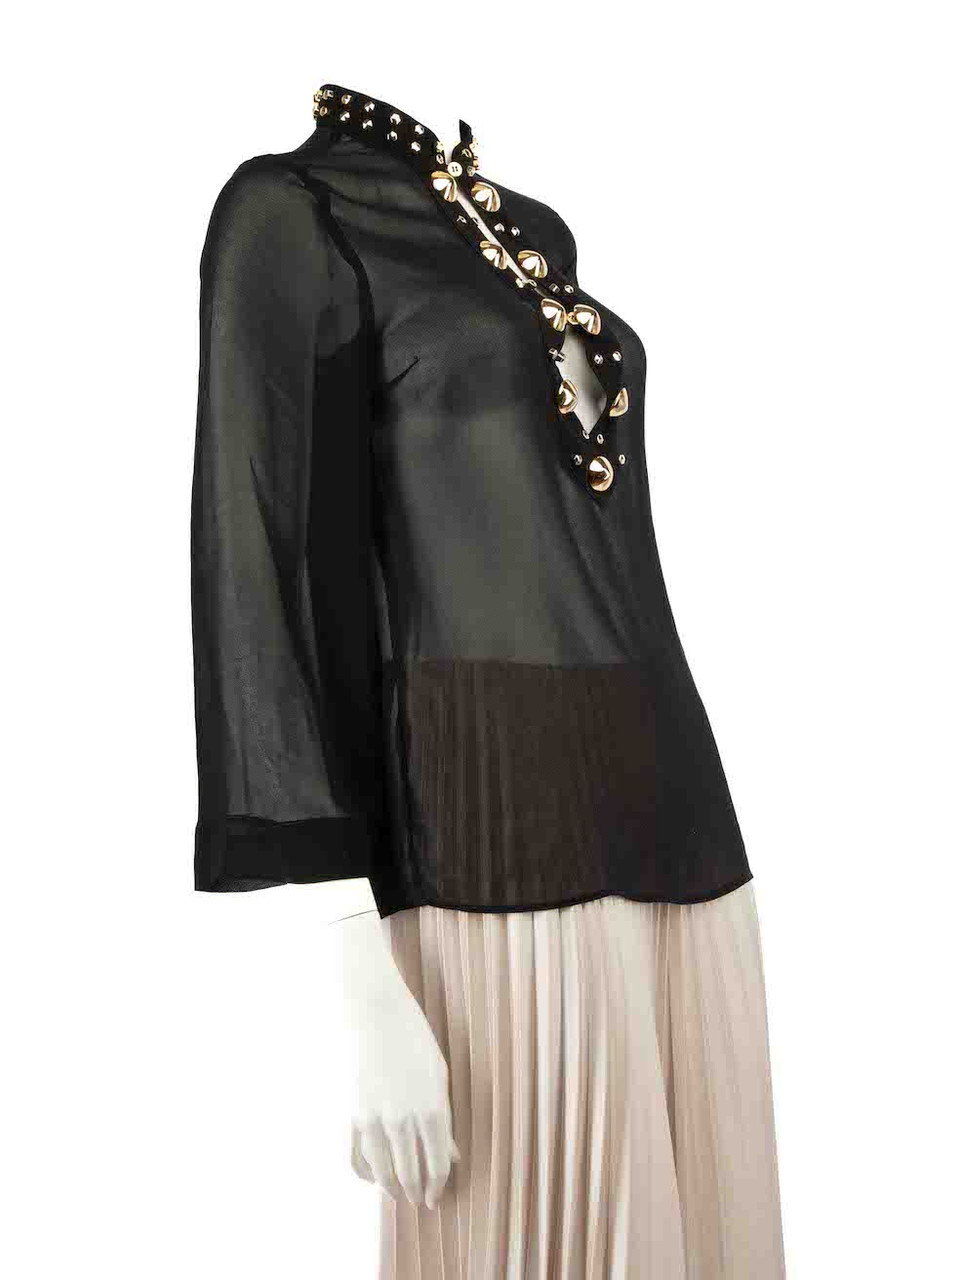 Versace Versace Collection Black Silk Sheer Studded Blouse